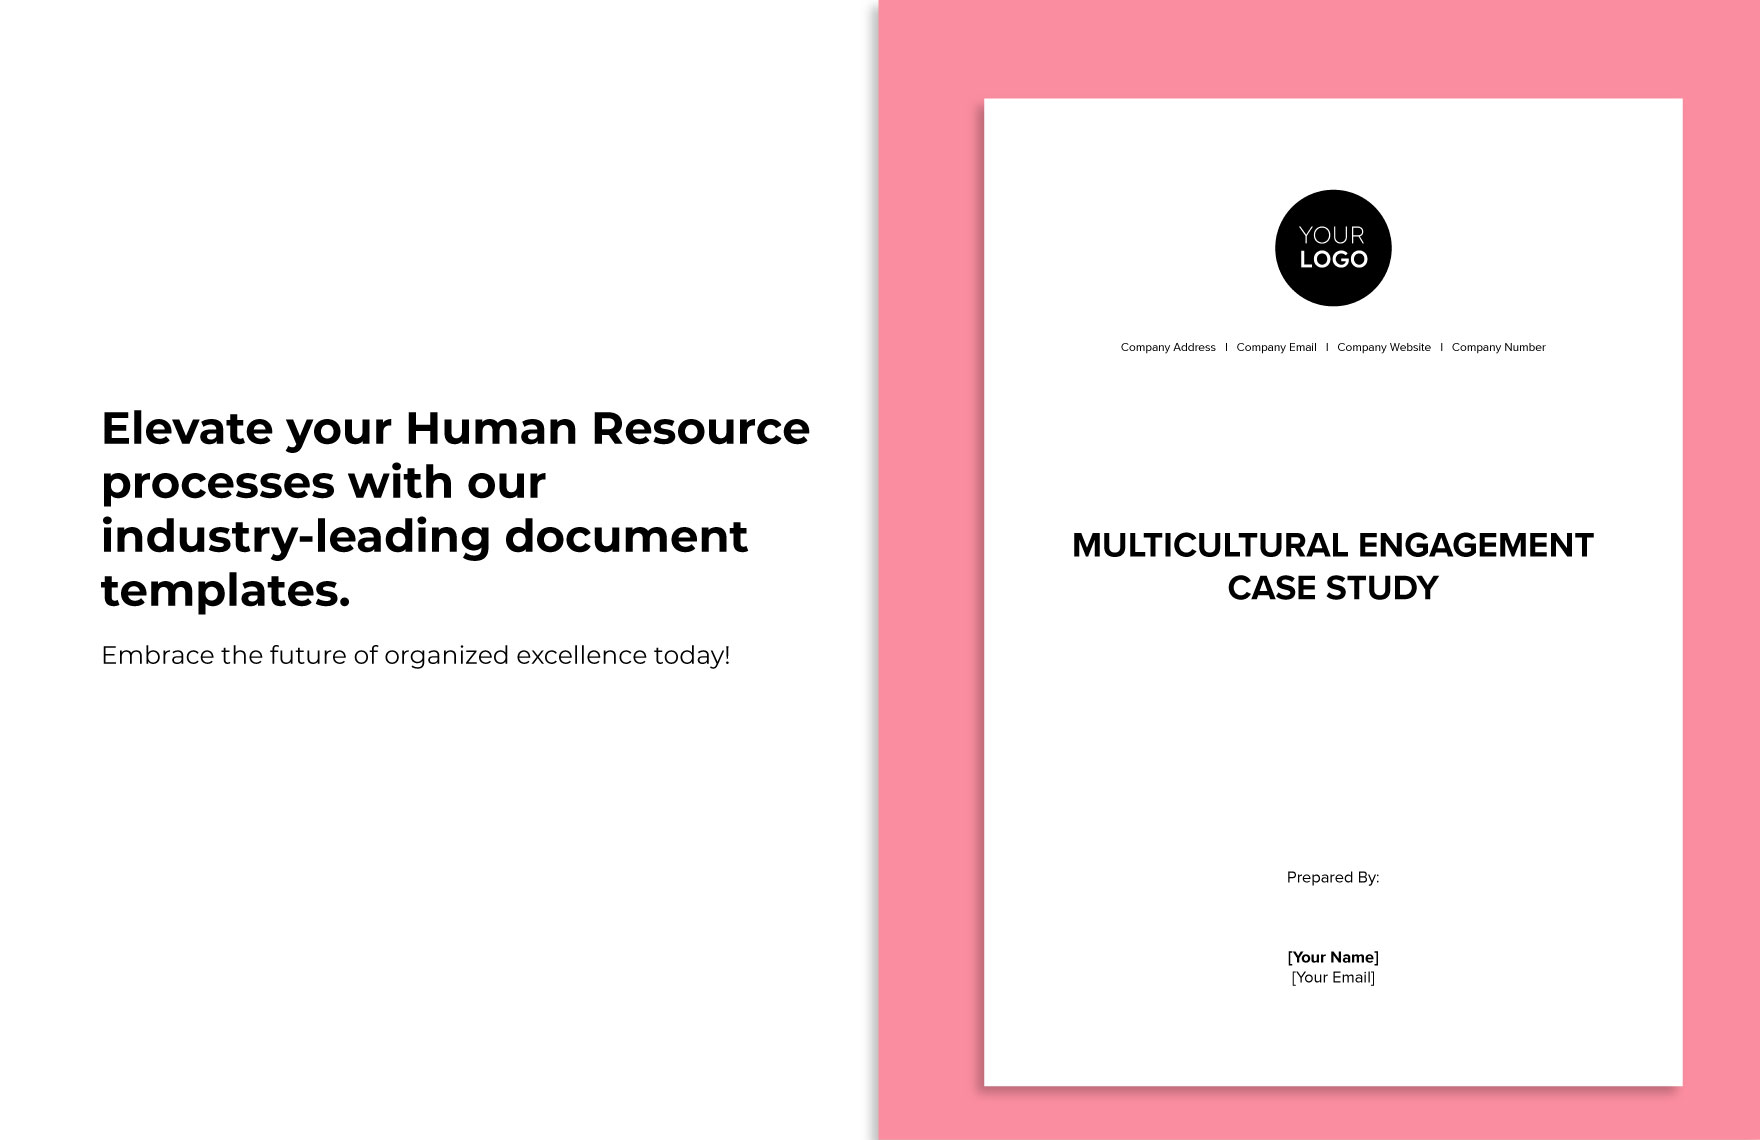 Multicultural Engagement Case Study HR Template